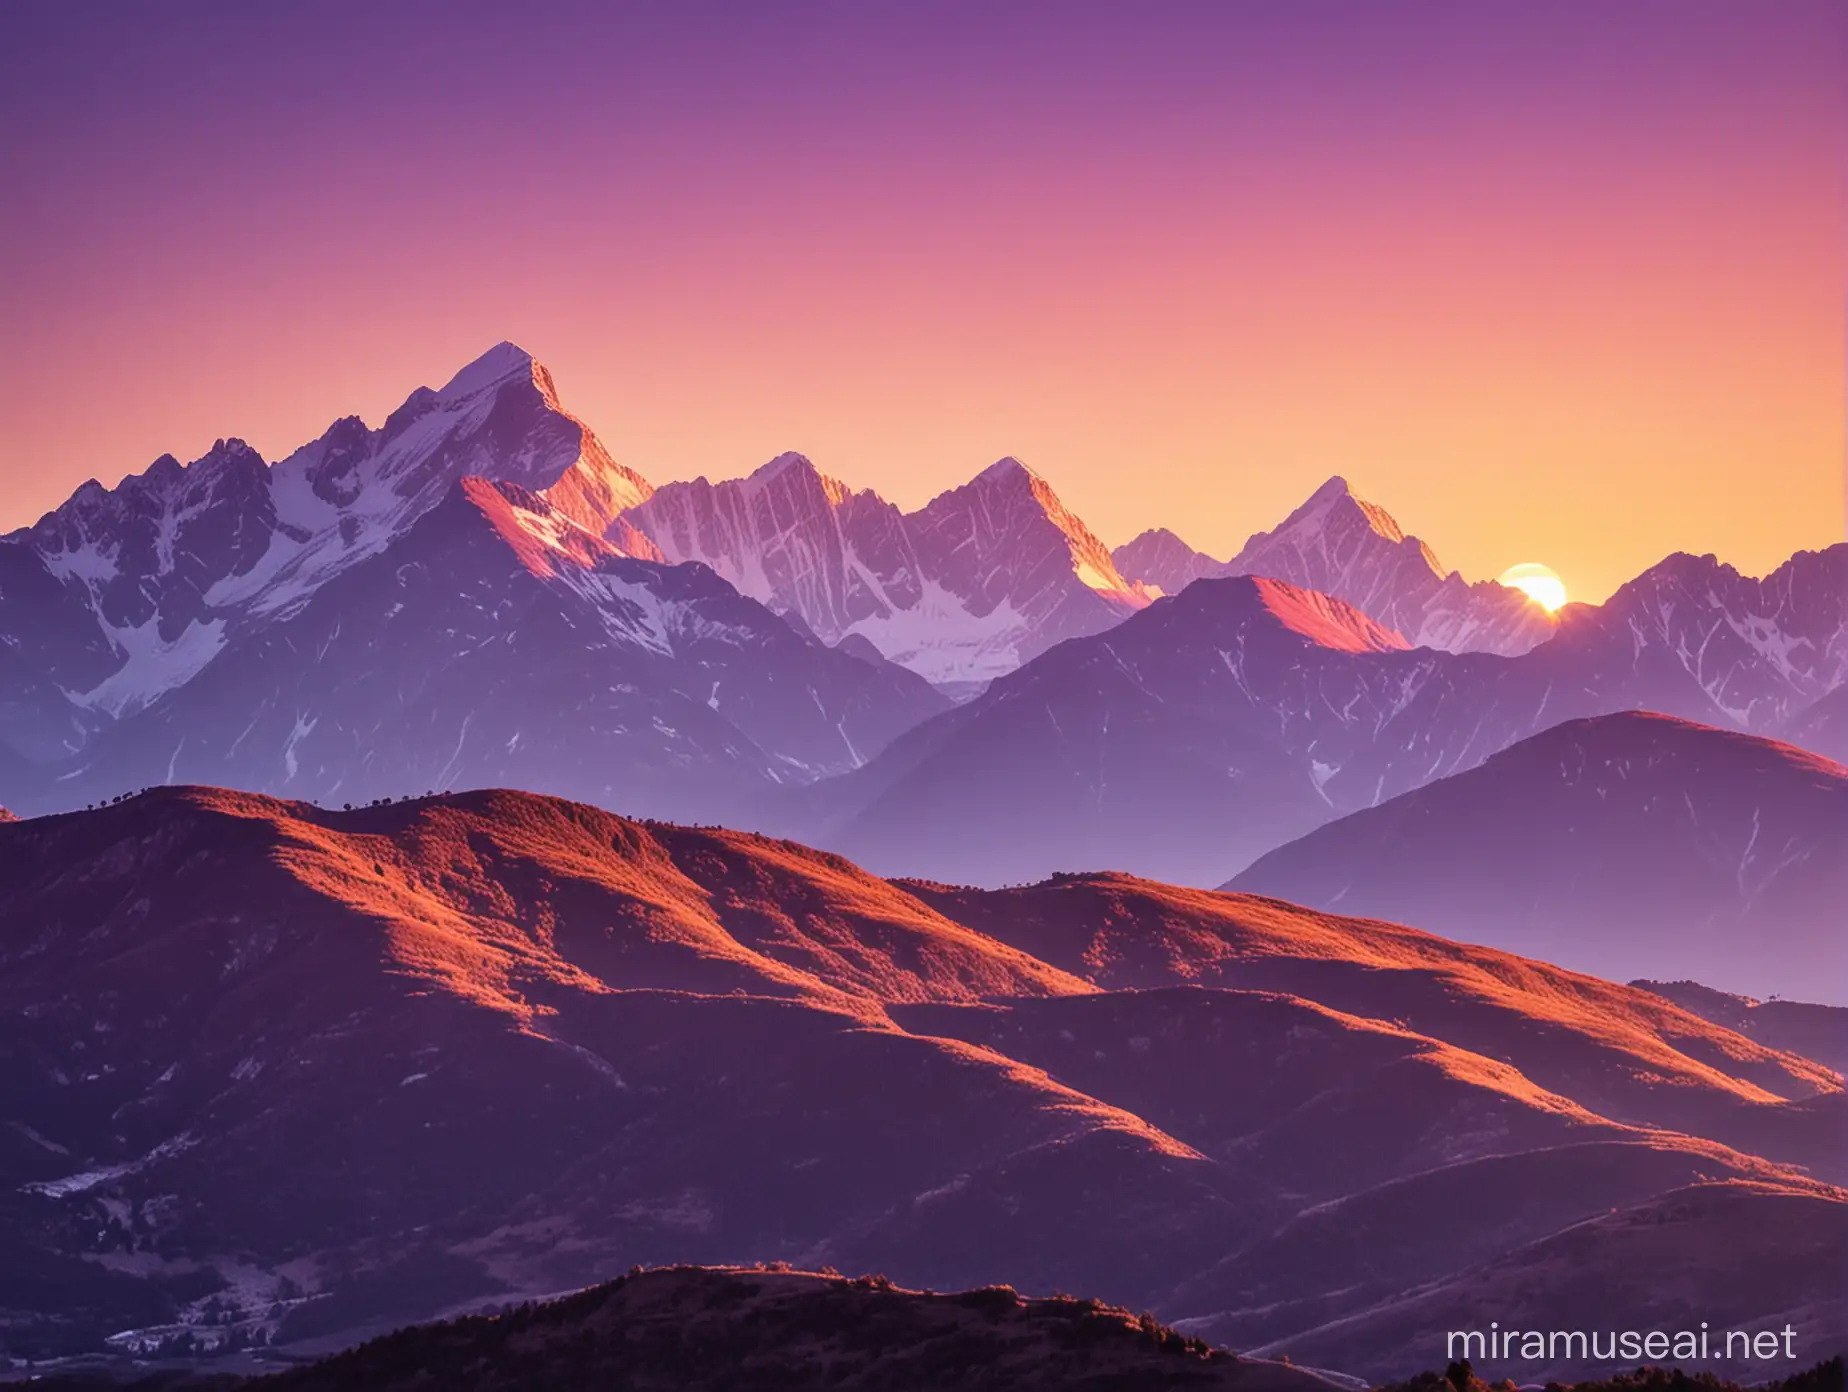 mountainrange during sunset, the sky vibrant colours purple, gold, pink, the mountains looking purple, sun is seen setting behind the mountains to the left, light shining between the mountains
